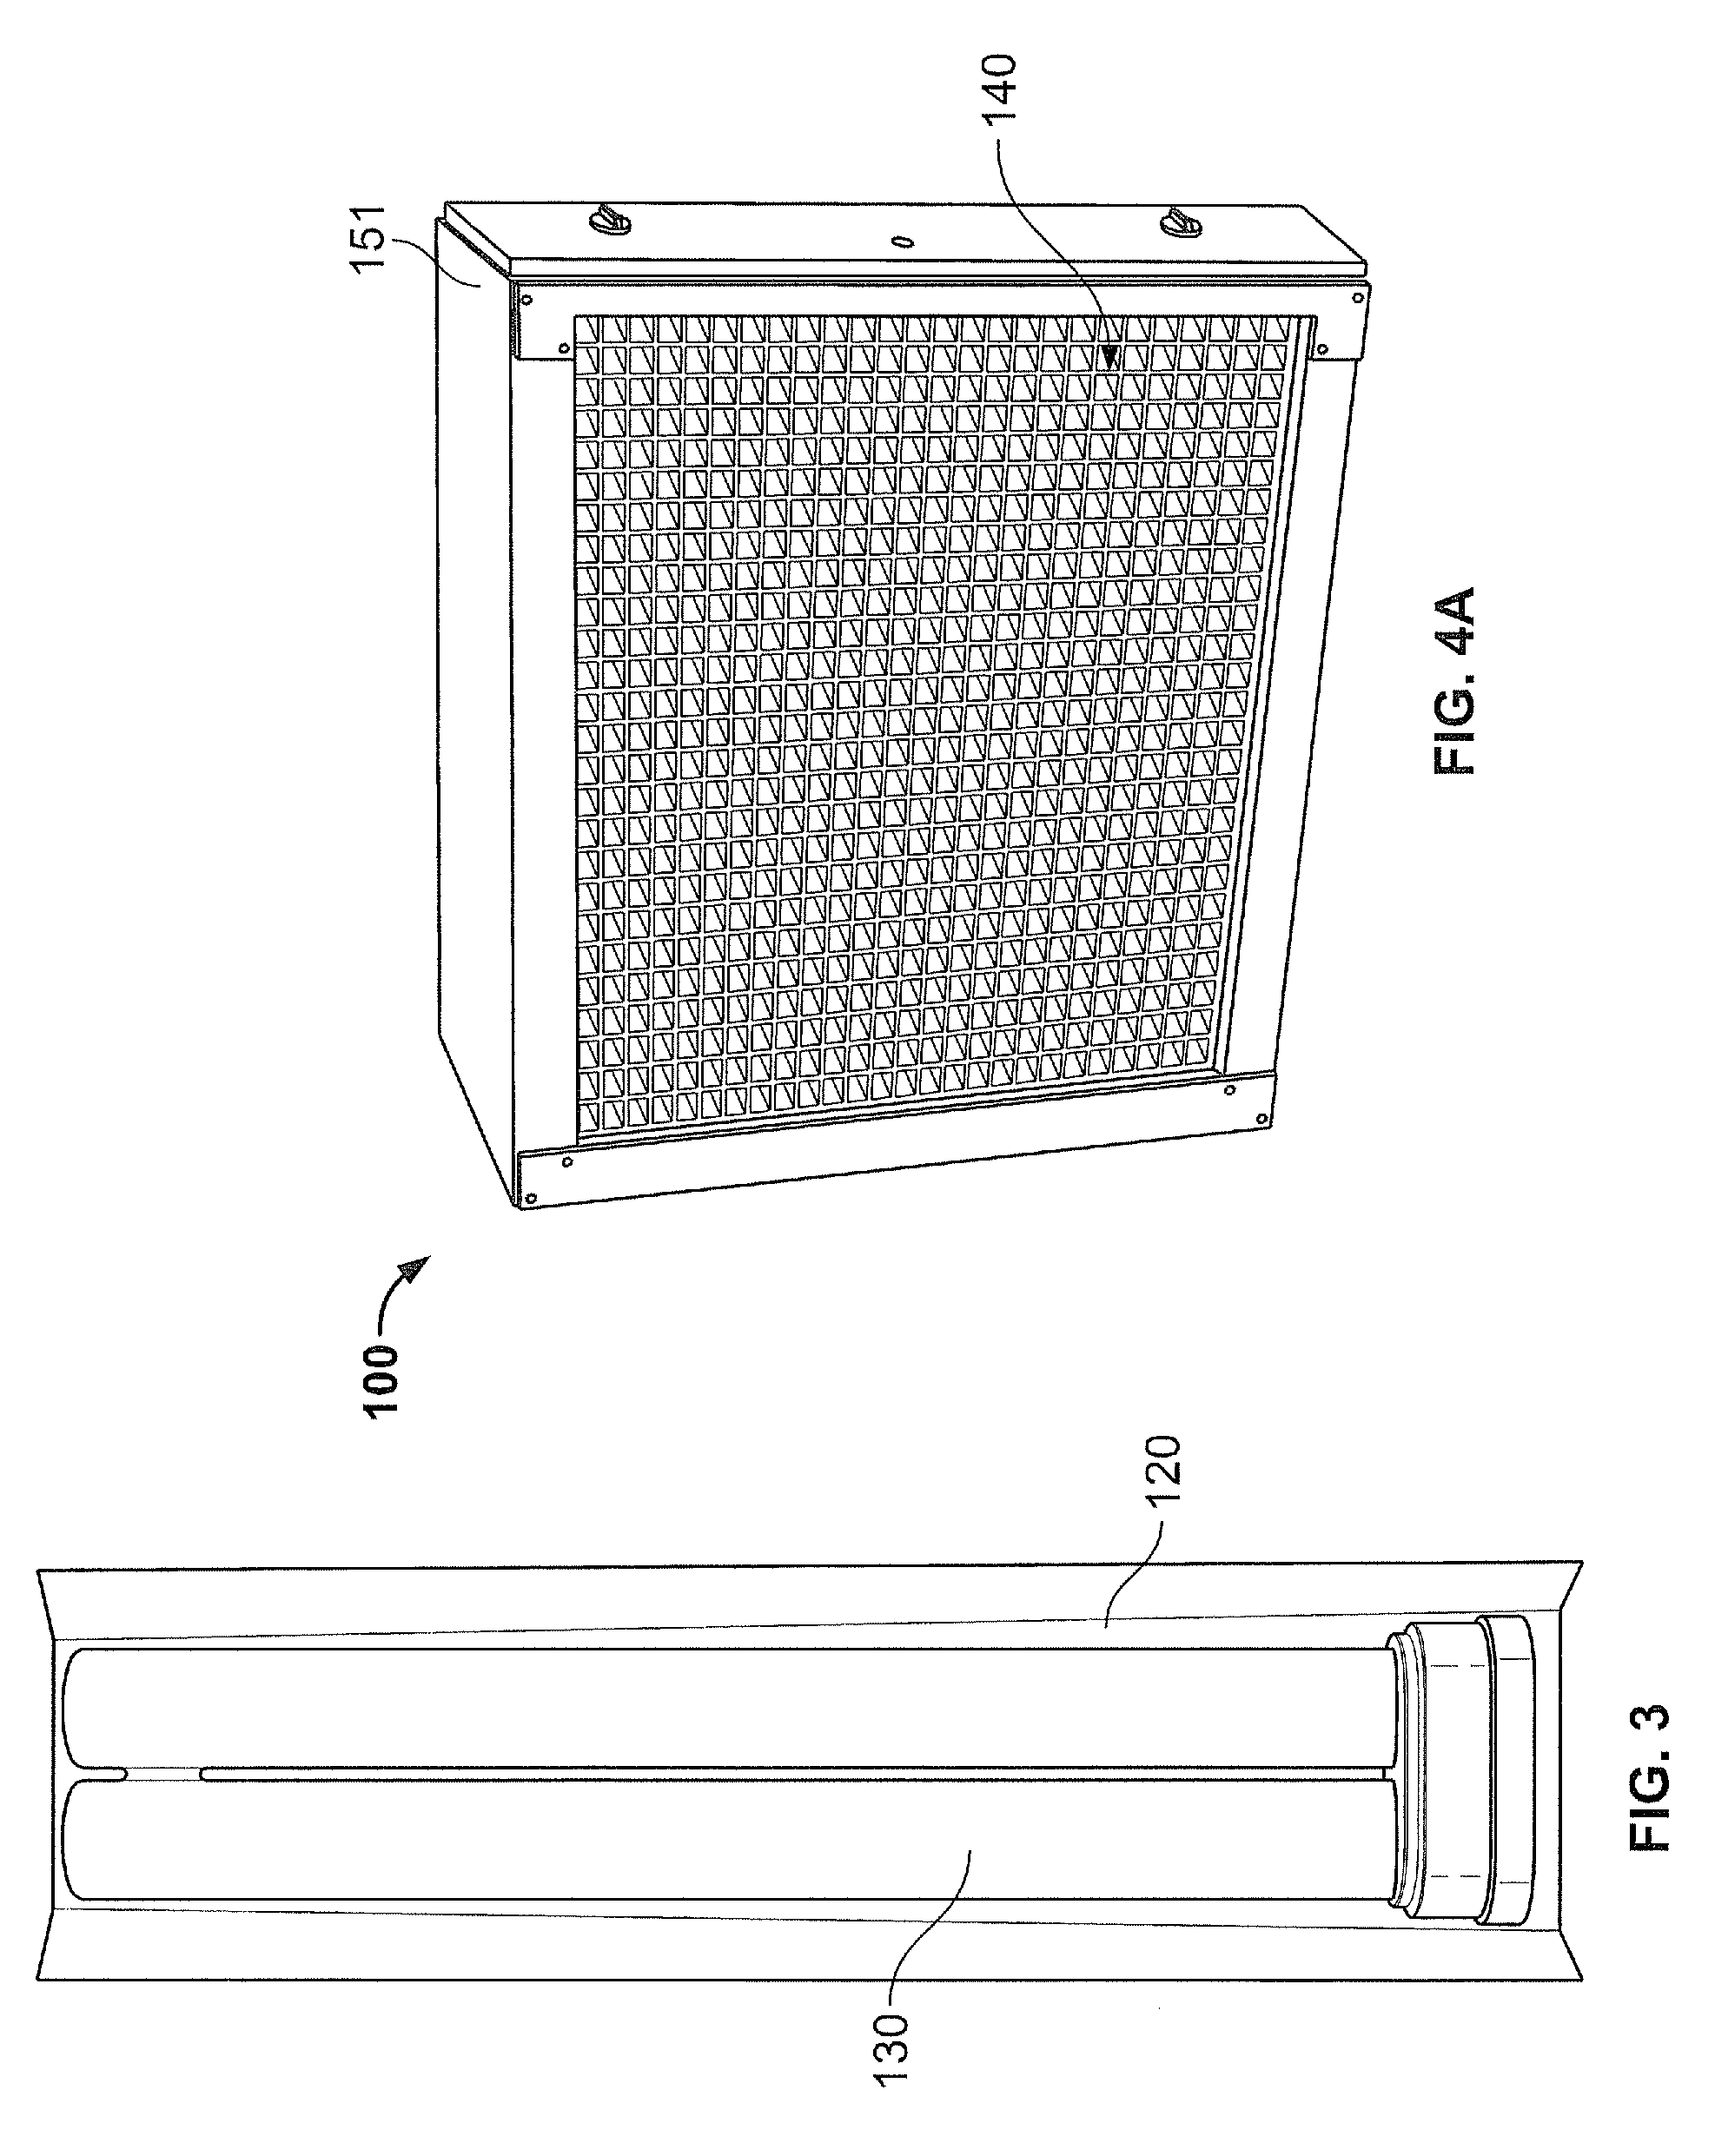 System and method for photocatalytic oxidation air filtration using a substrate with photocatalyst particles power coated thereon